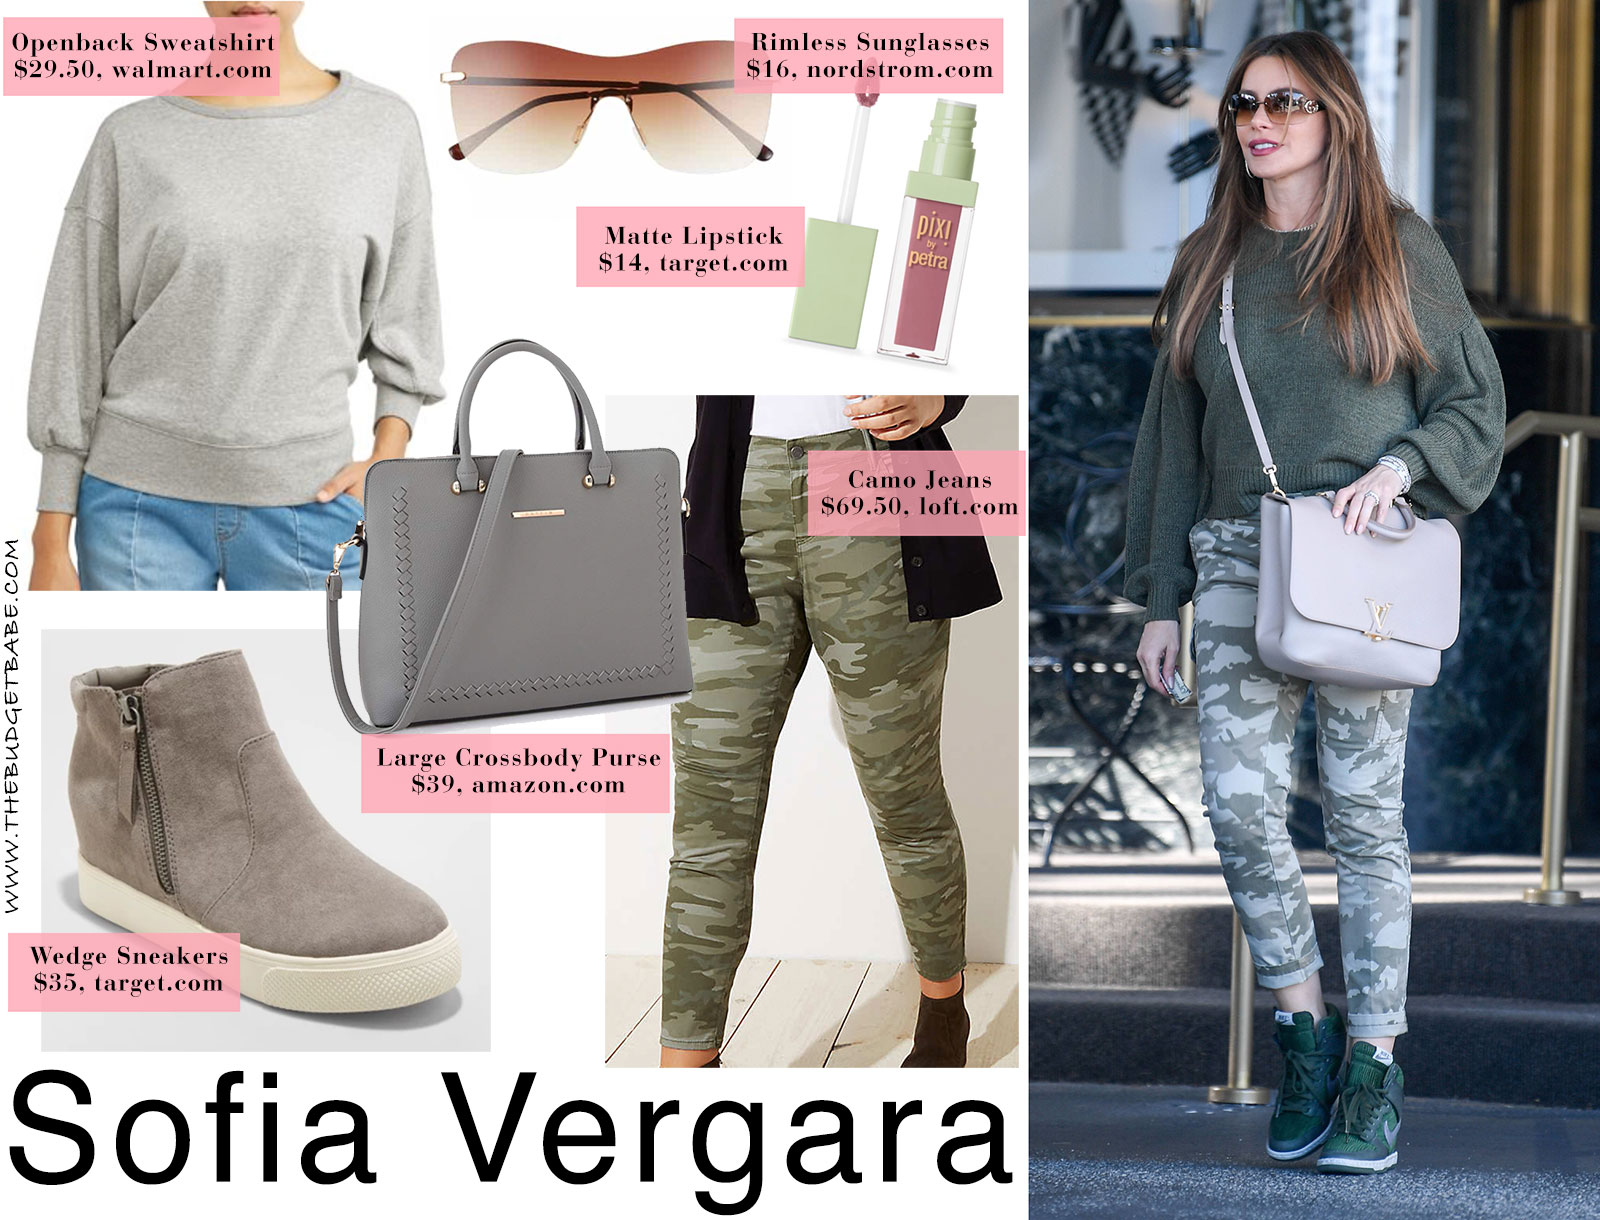 Sofia Vergara's dolman sleeve sweater, camo jeans and wedge sneakers look for less